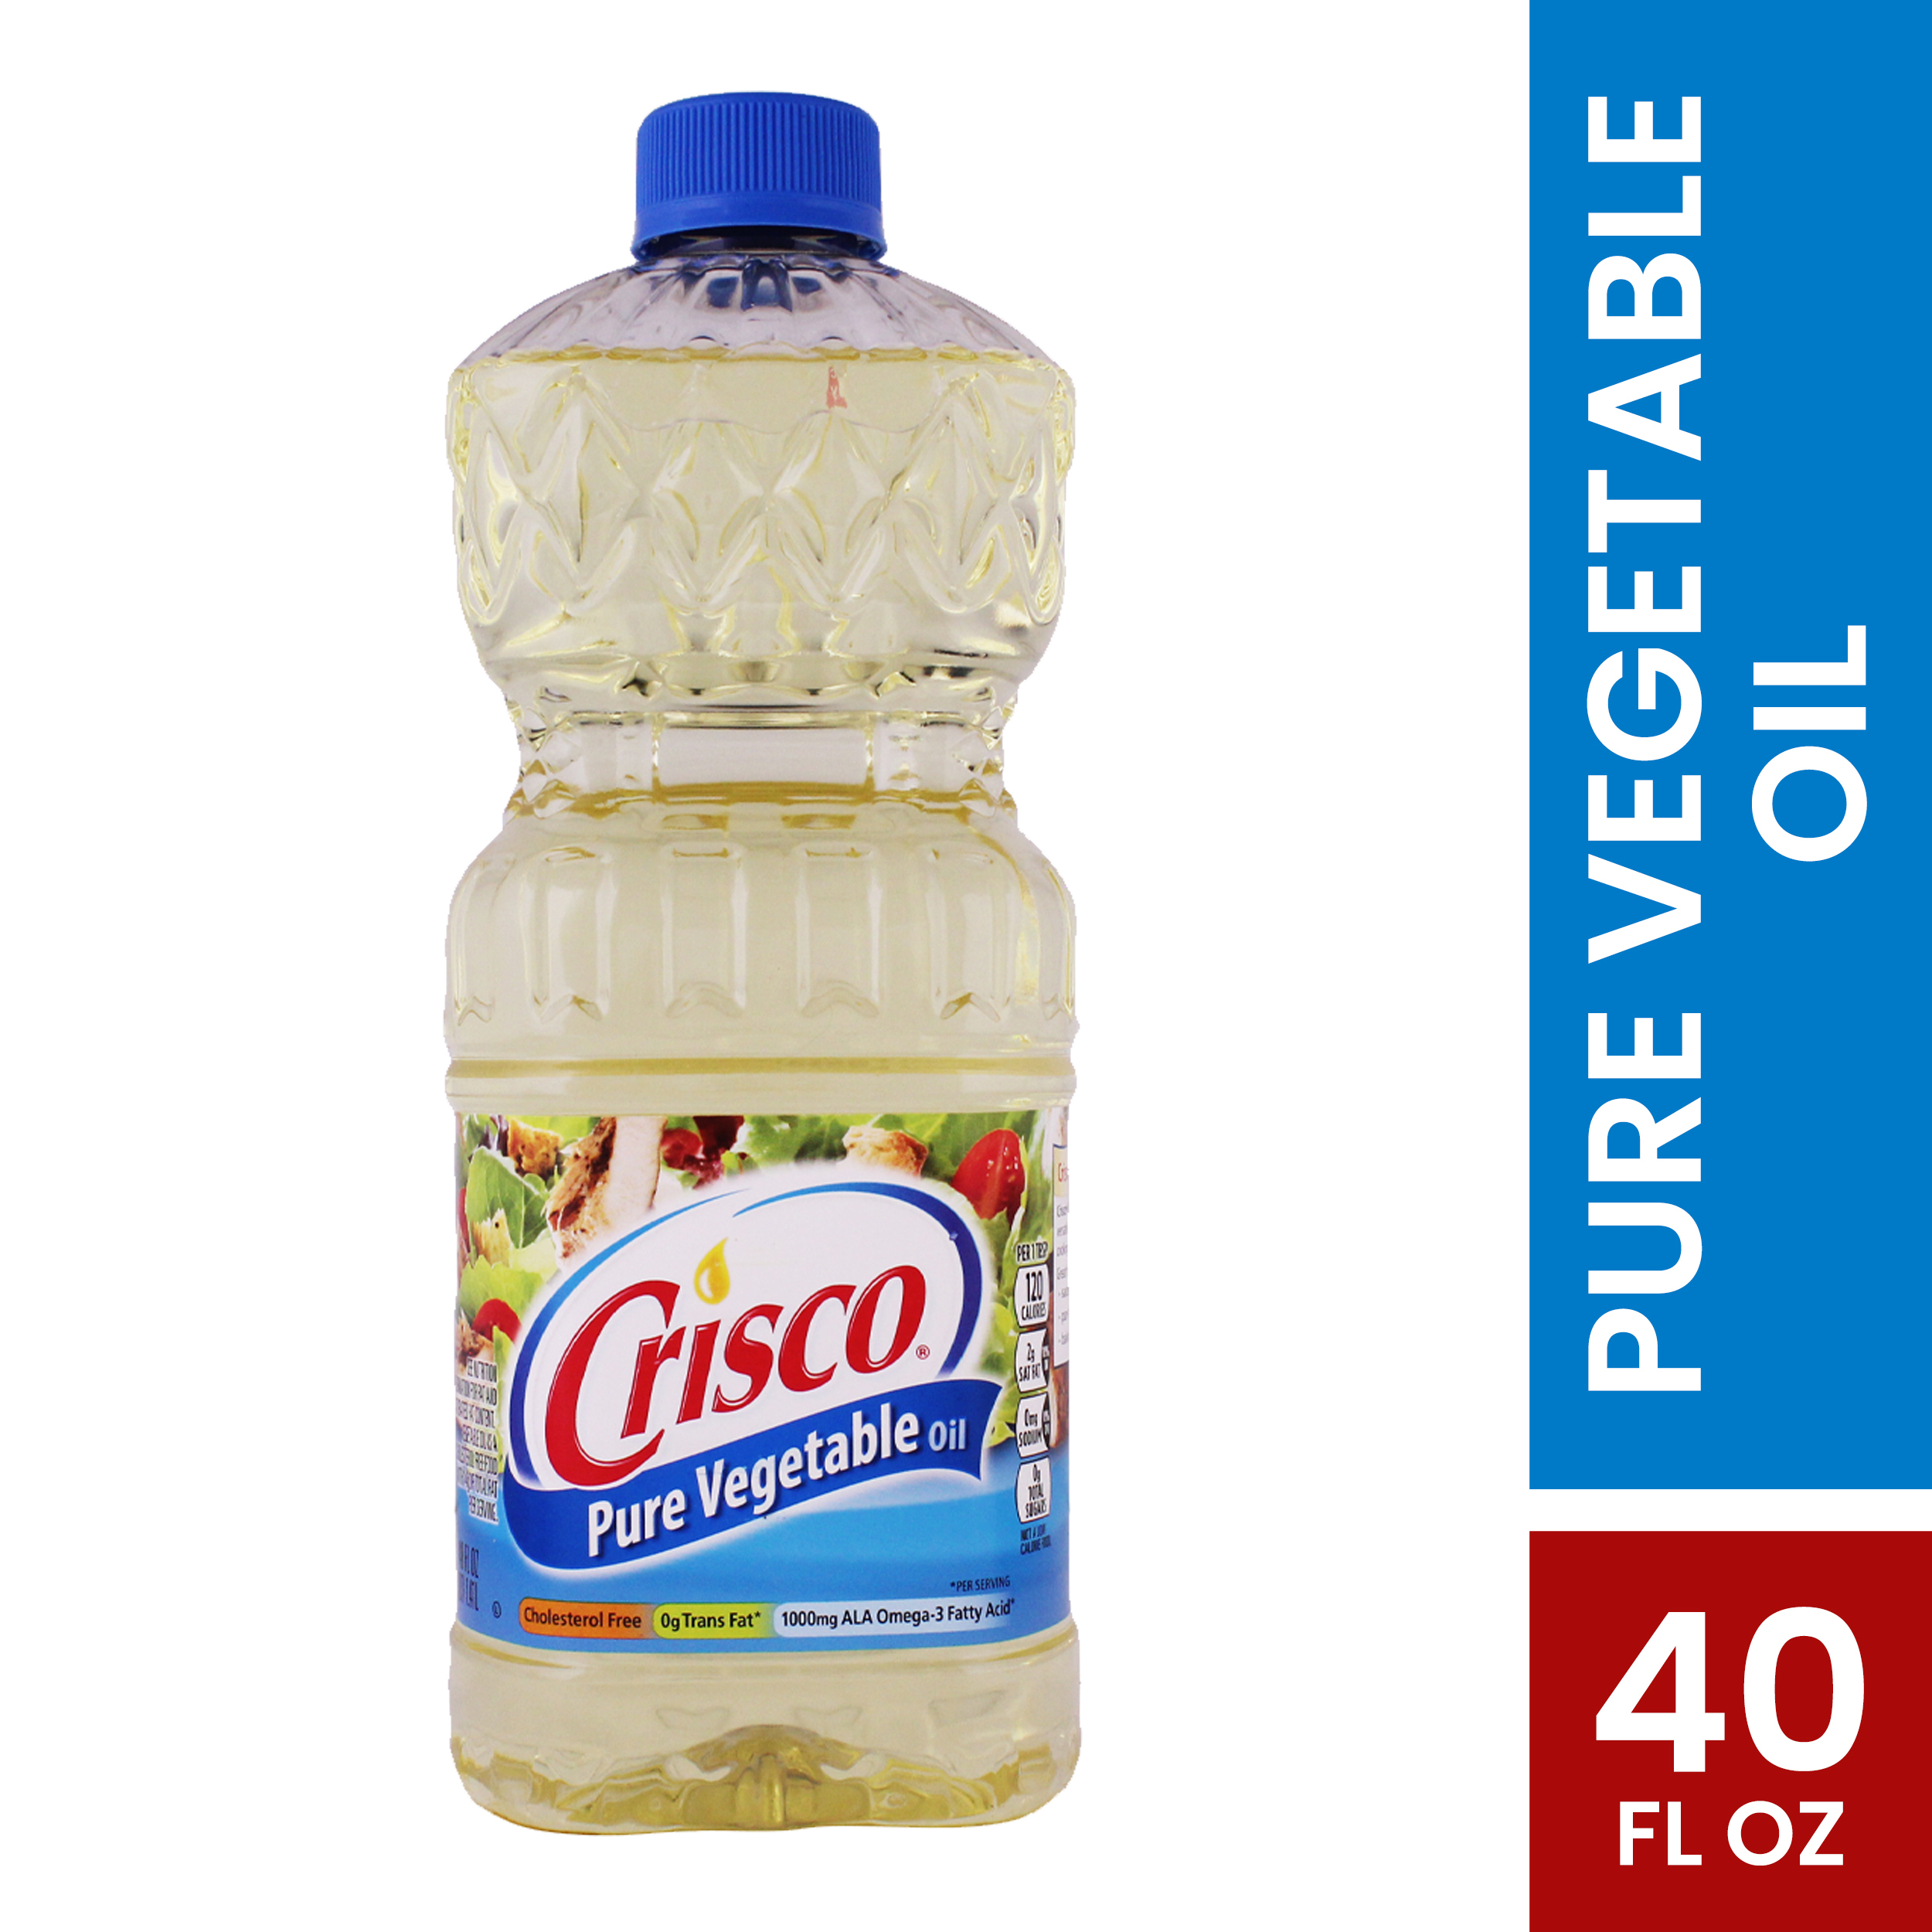 Crisco Pure Vegetable Cooking Oil, 40 fl oz - image 1 of 11